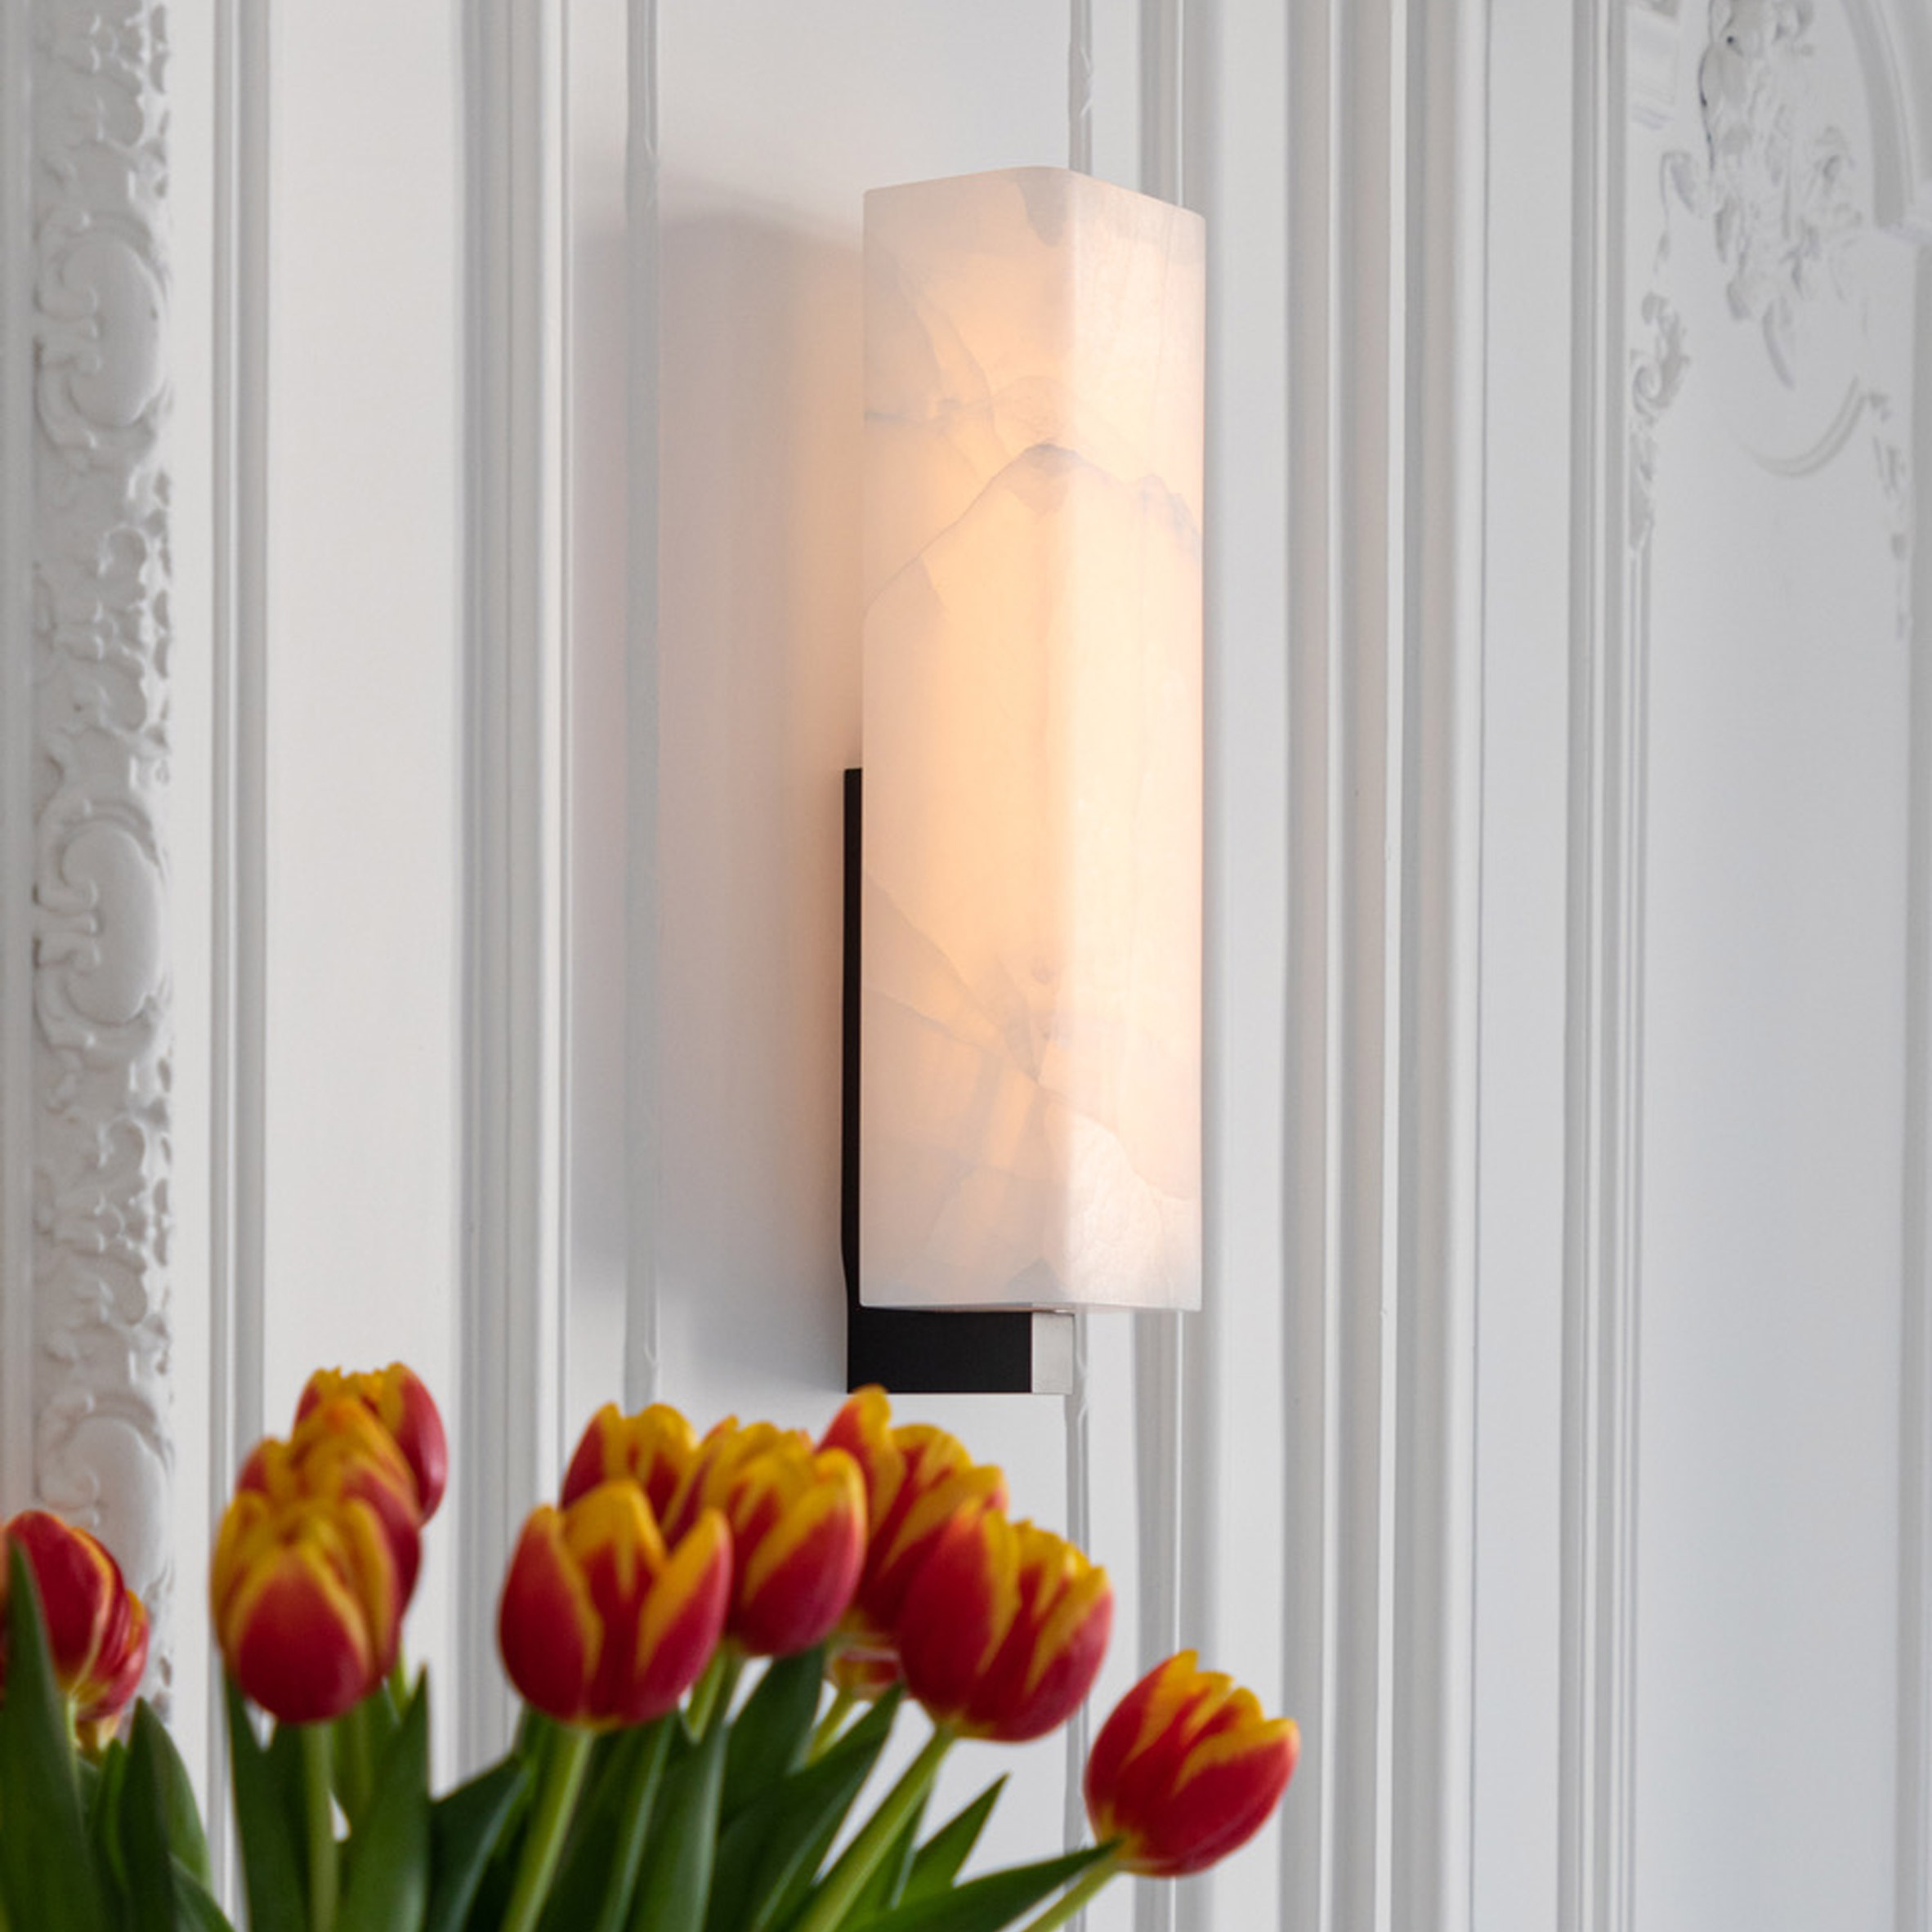 Embrun wall light by Ozone